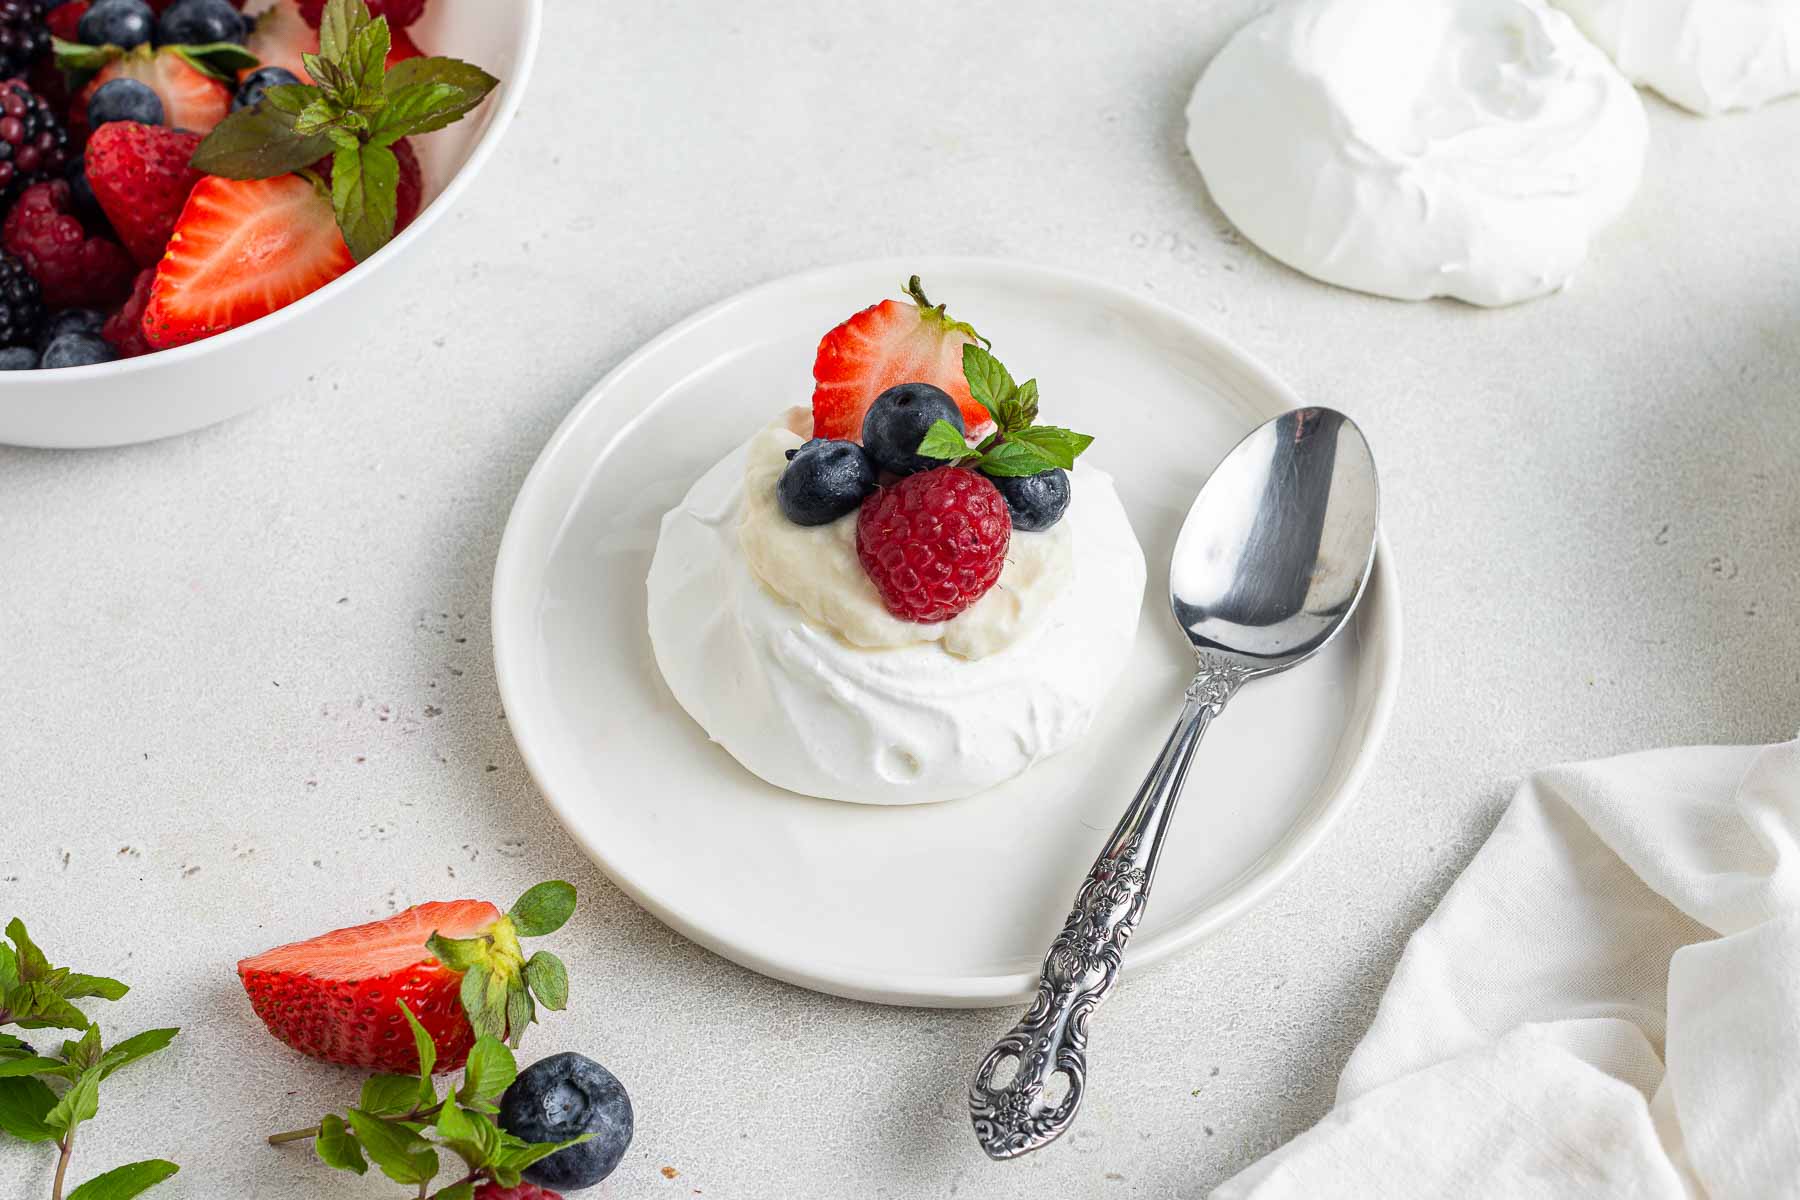 Mini pavlova on plate with fresh whipped cream and berries.